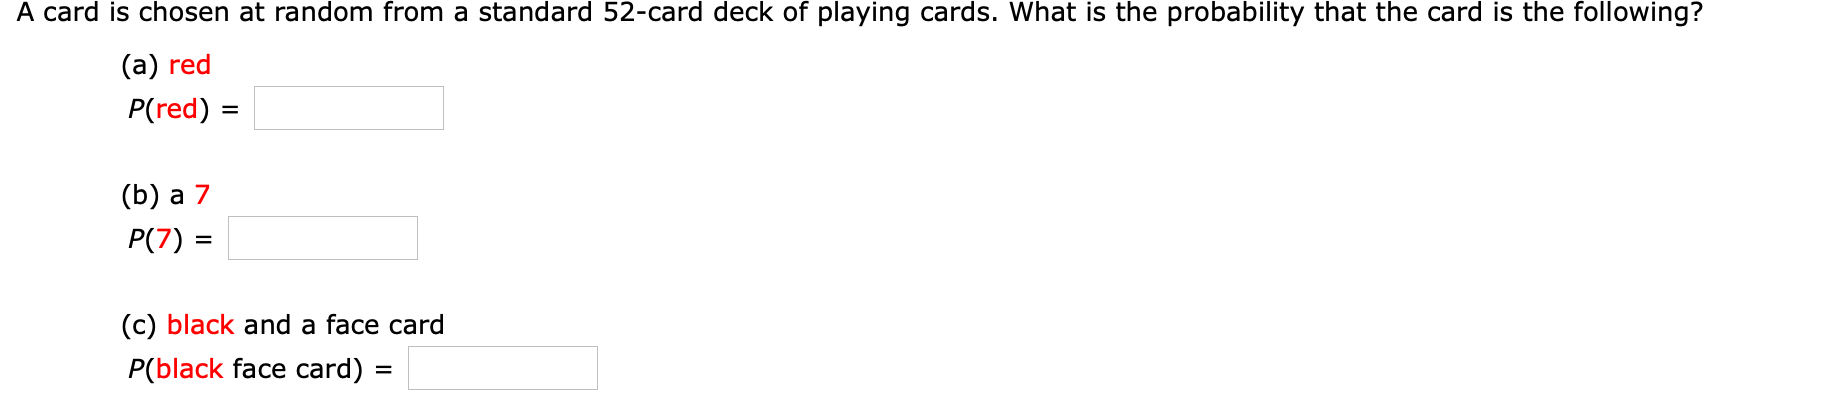 A card is chosen at random from a standard 52-card deck of playing cards. What is the probability that the card is the following?
(а) red
P(red) =
(b) а 7
P(7) =
(c) black and a face card
P(black face card) :
